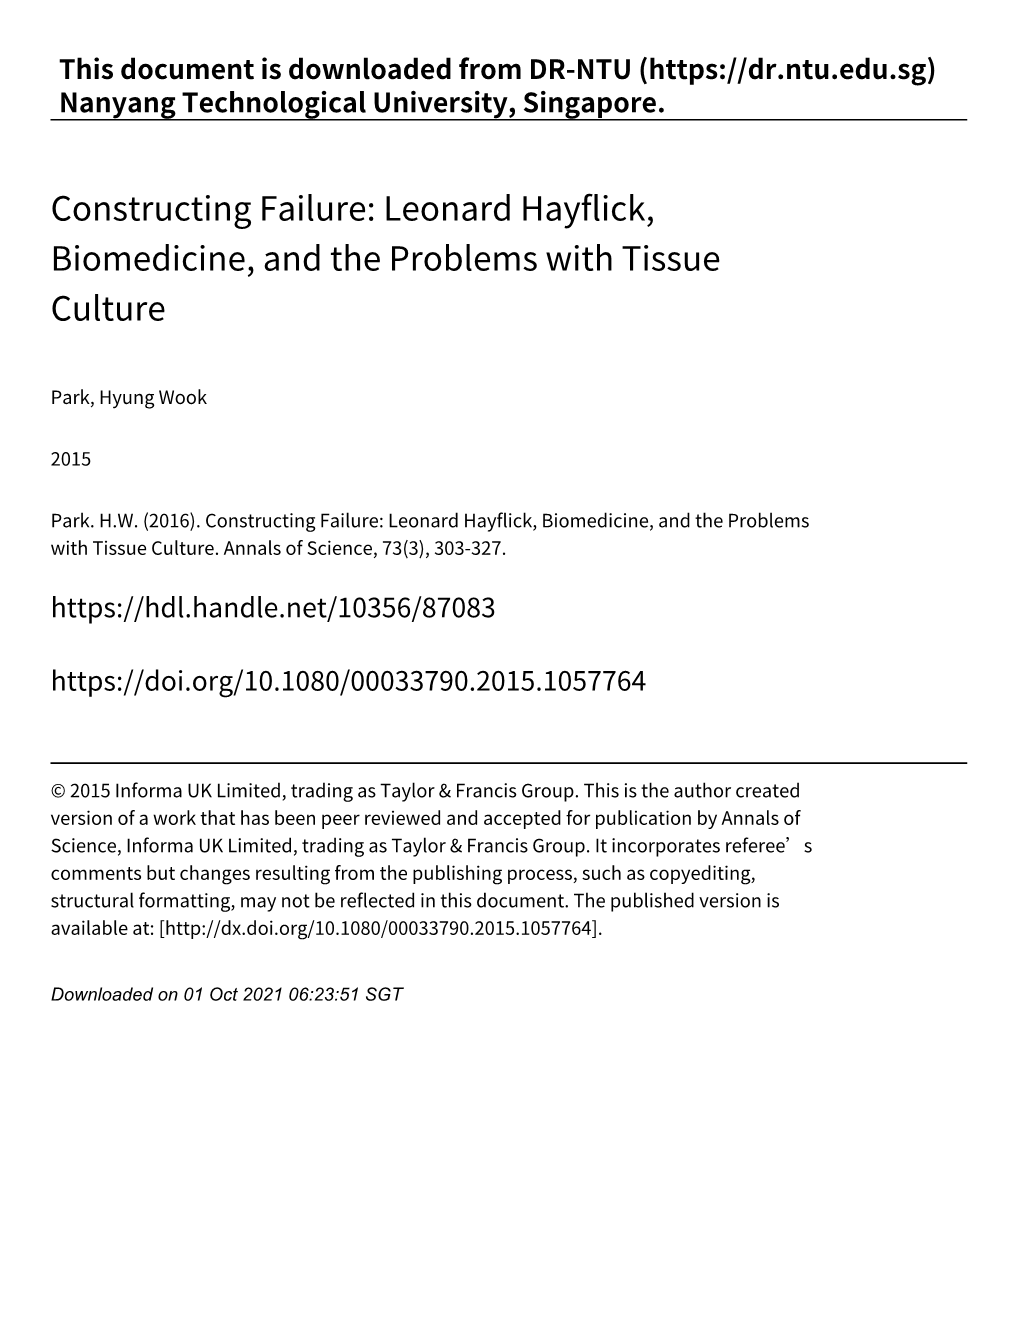 Constructing Failure: Leonard Hayflick, Biomedicine, and the Problems with Tissue Culture